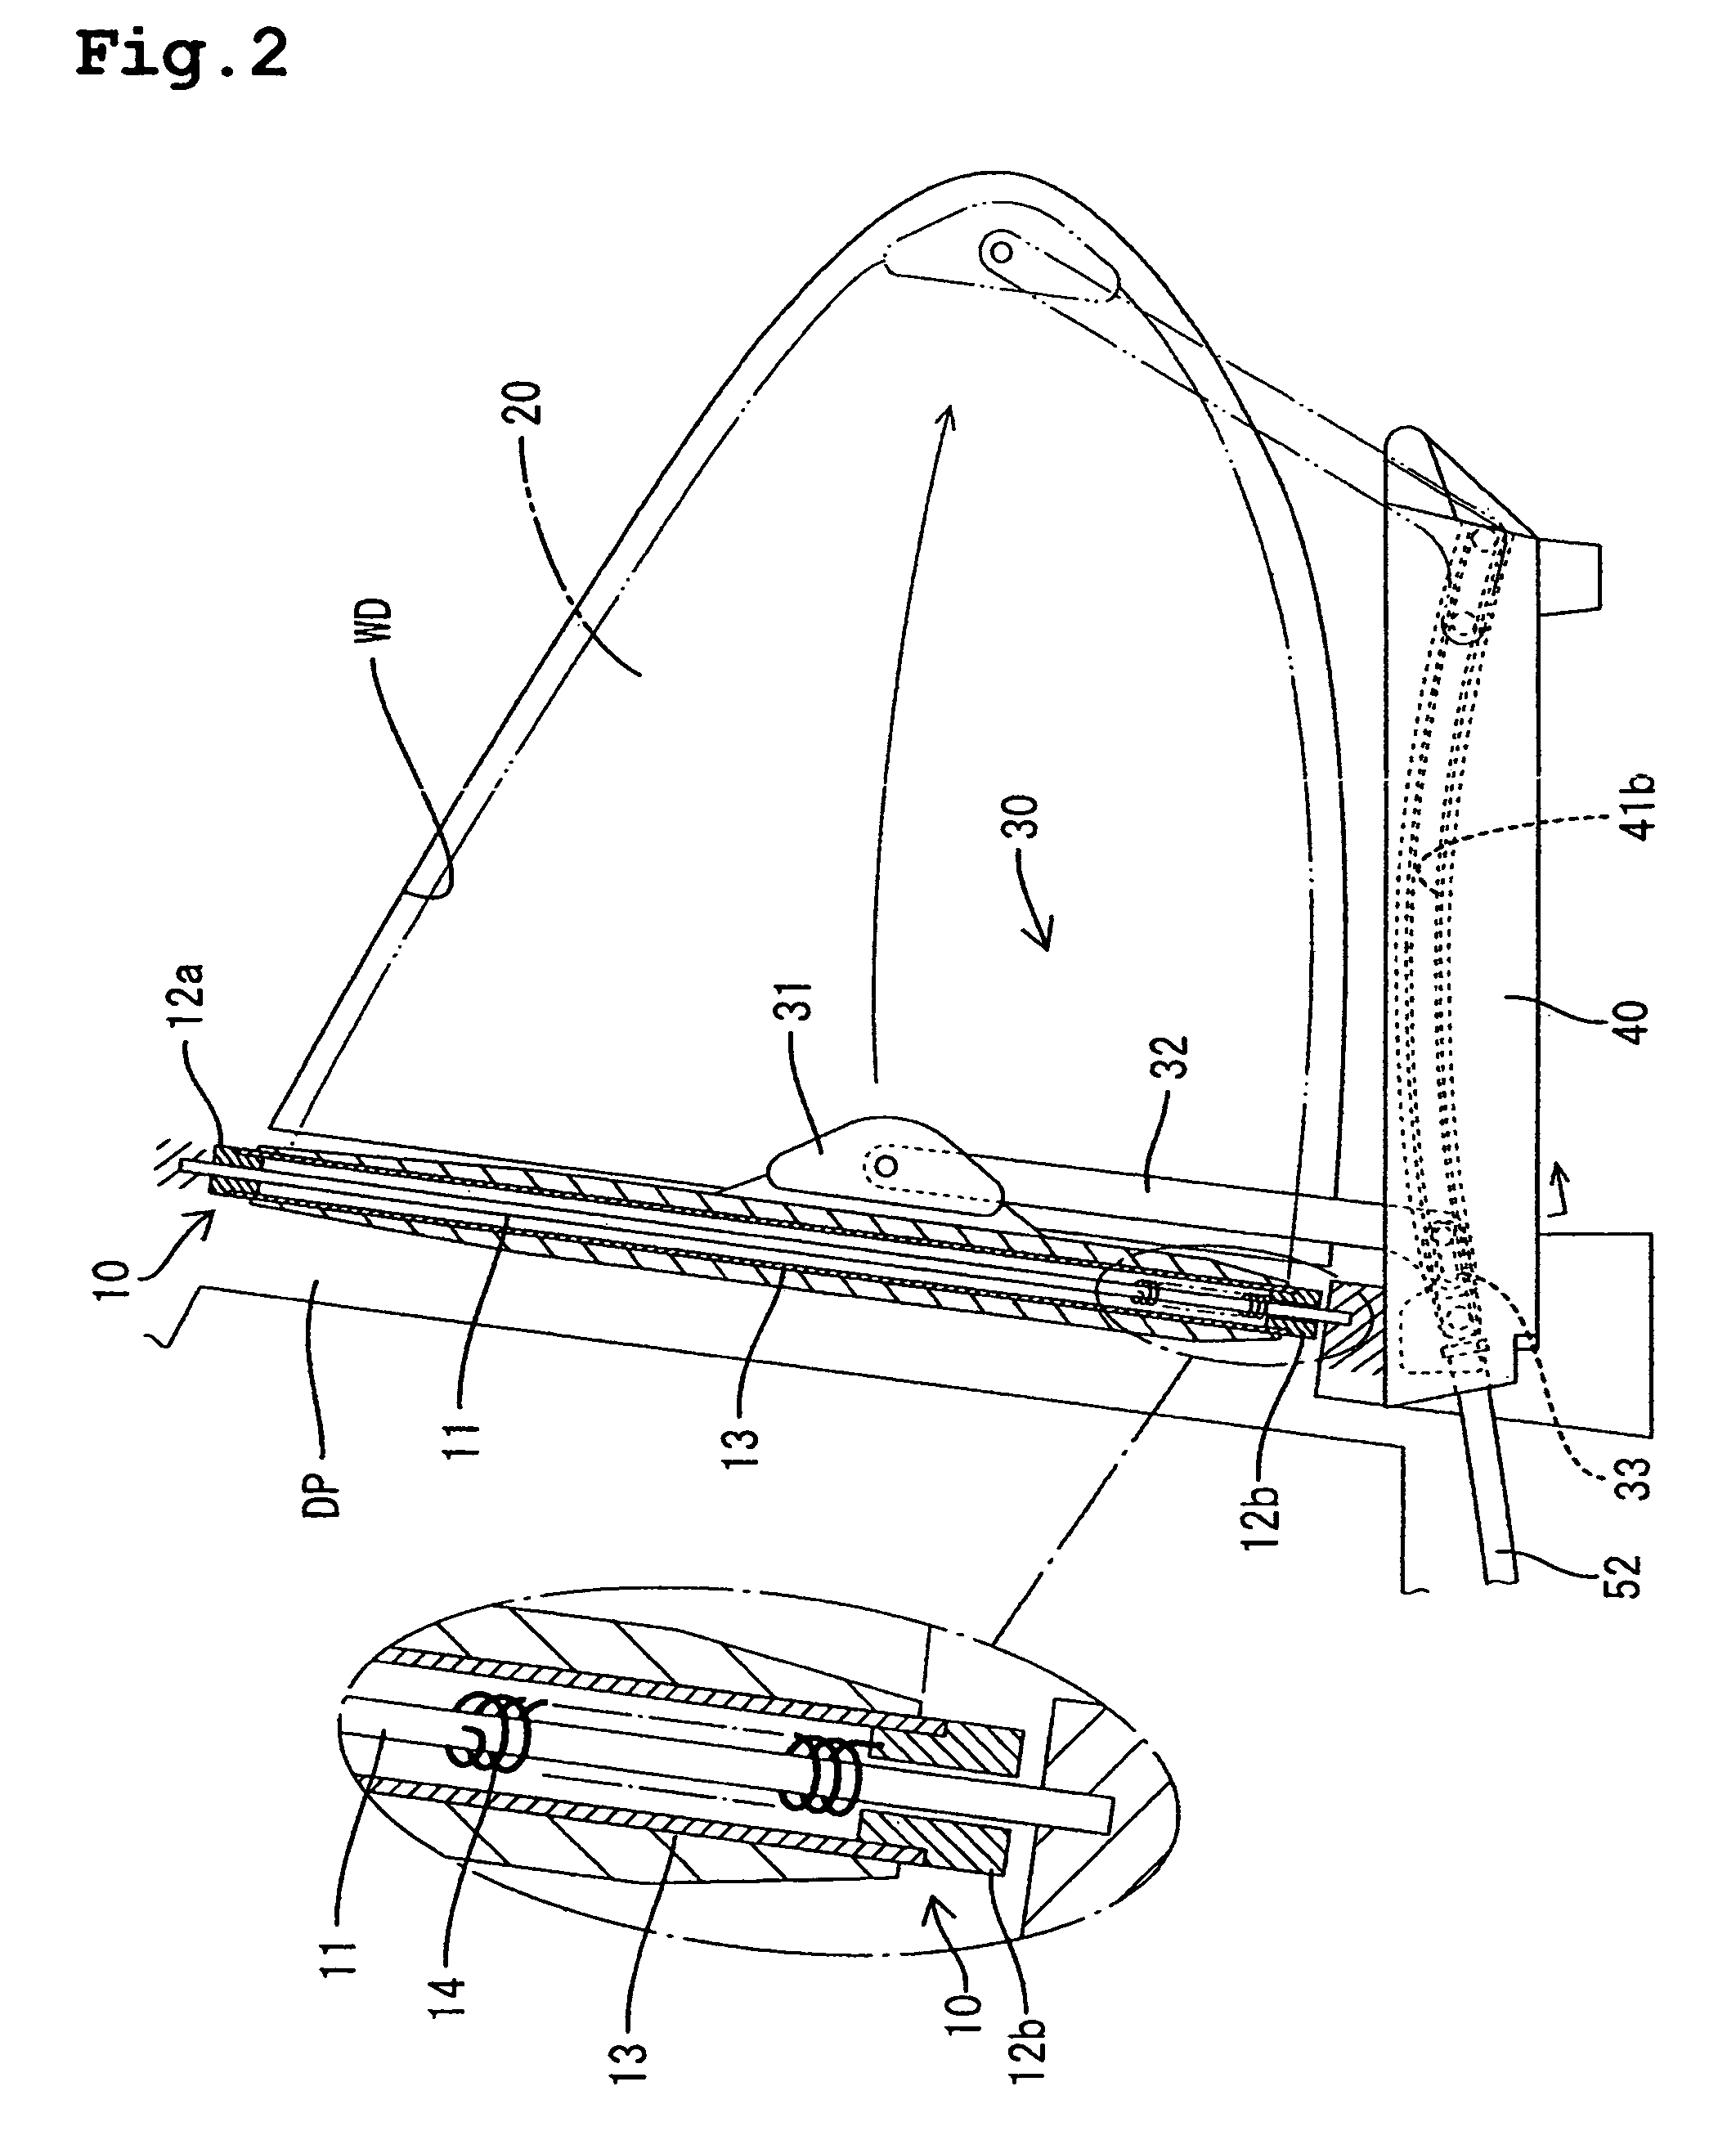 Sunshade actuation device